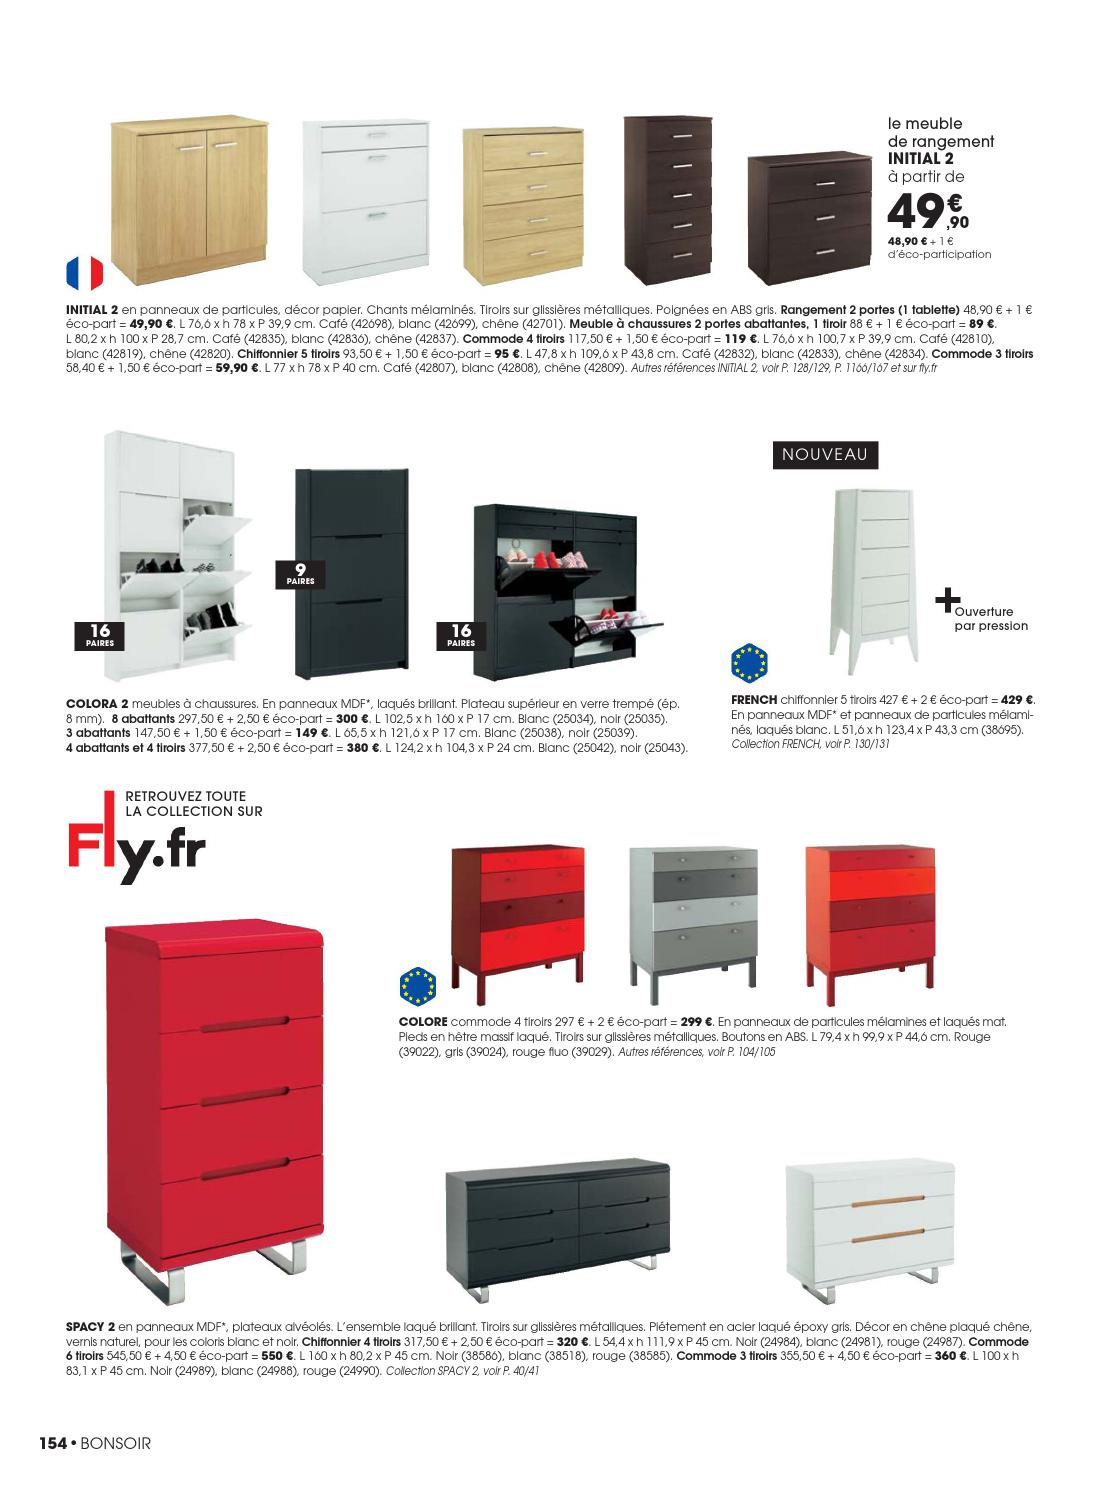 Catalogue Fly - Collection 2013/2014 By Joe Monroe - Issuu dedans Commode Blanc Laqué Fly